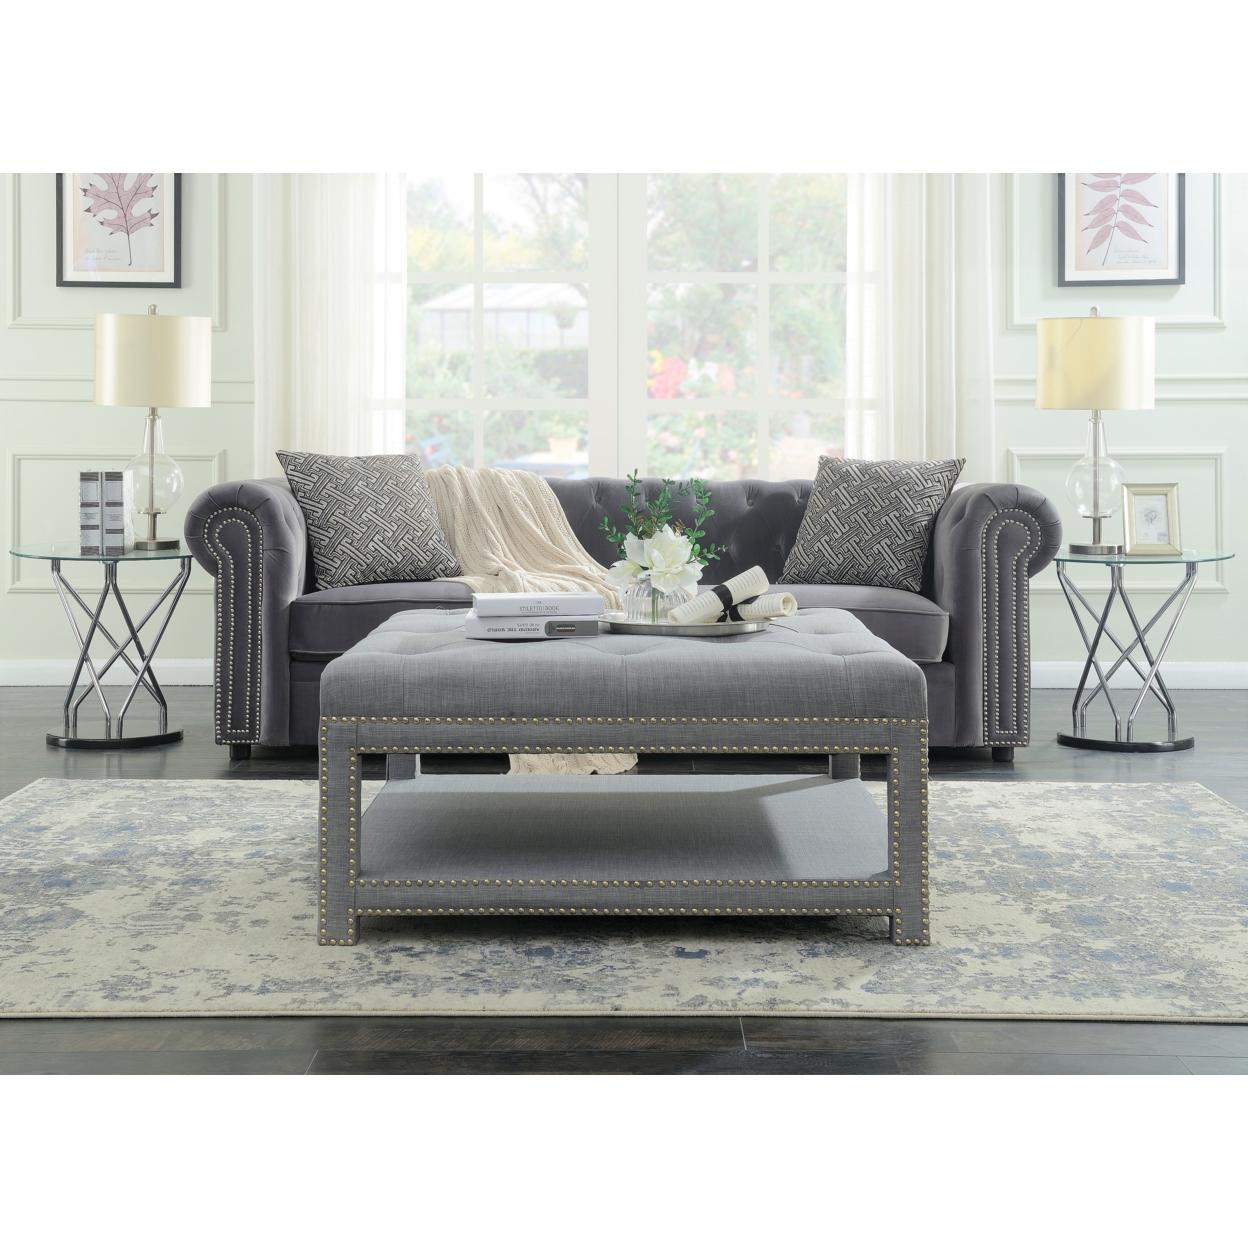 Quinn Coffee Table Ottoman 2-Layer Polished Nailhead Tufted Linen Bench - Purple